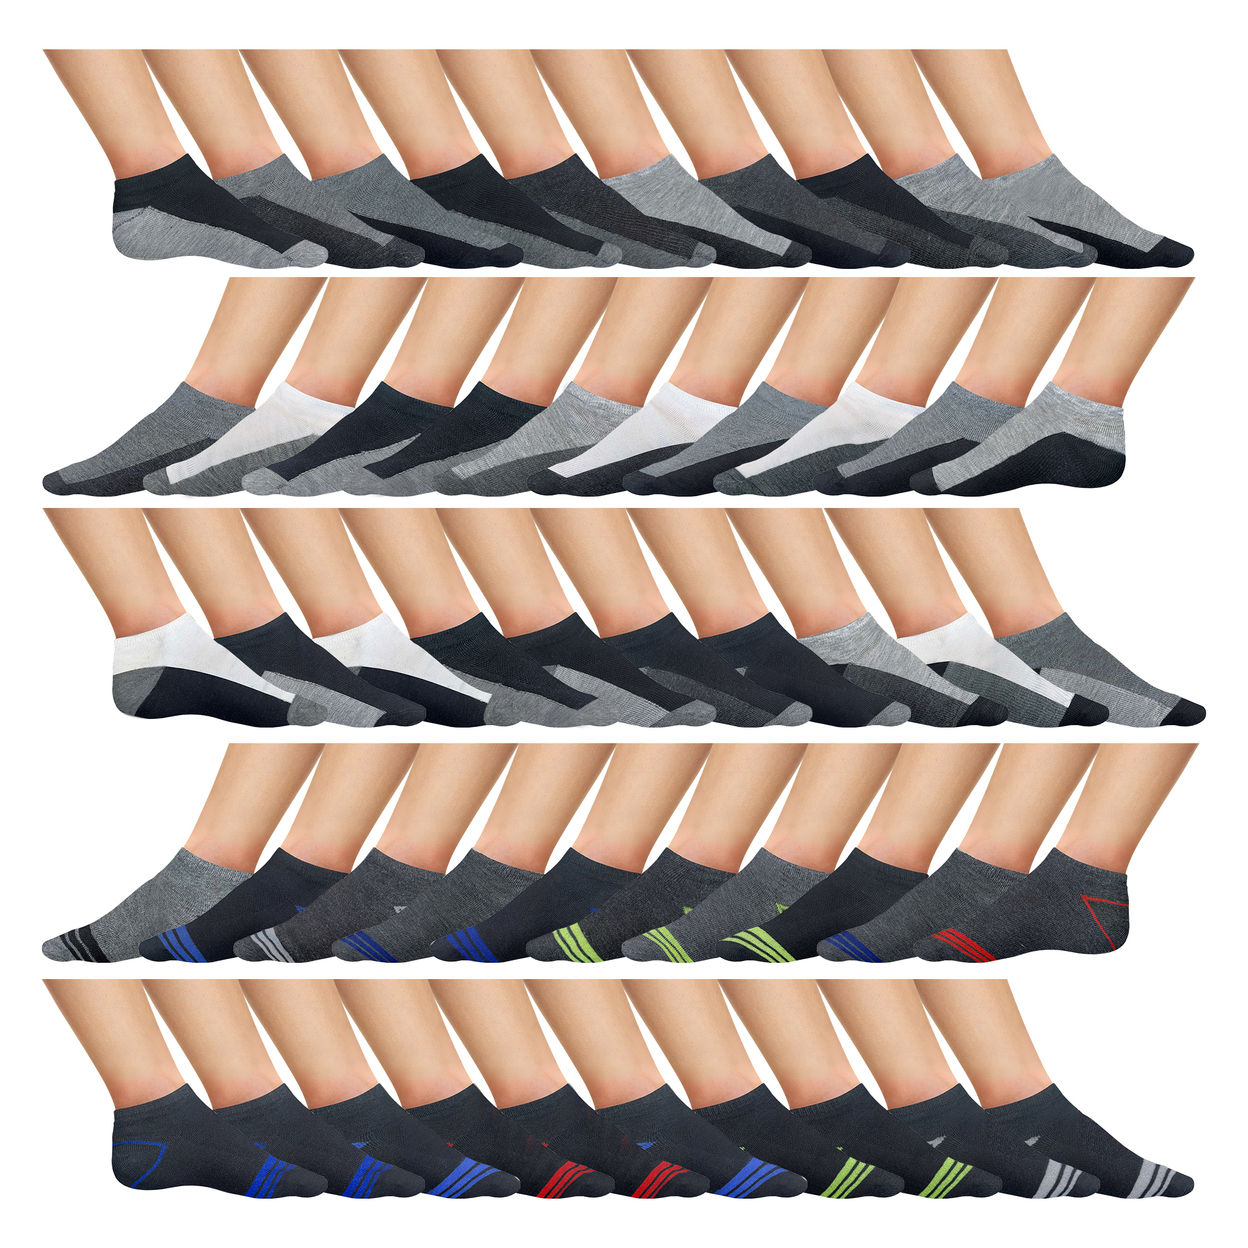 40-Pairs: Men's Moisture Wicking Performance Mesh Running Active Low-Cut Athletic Ankle Socks